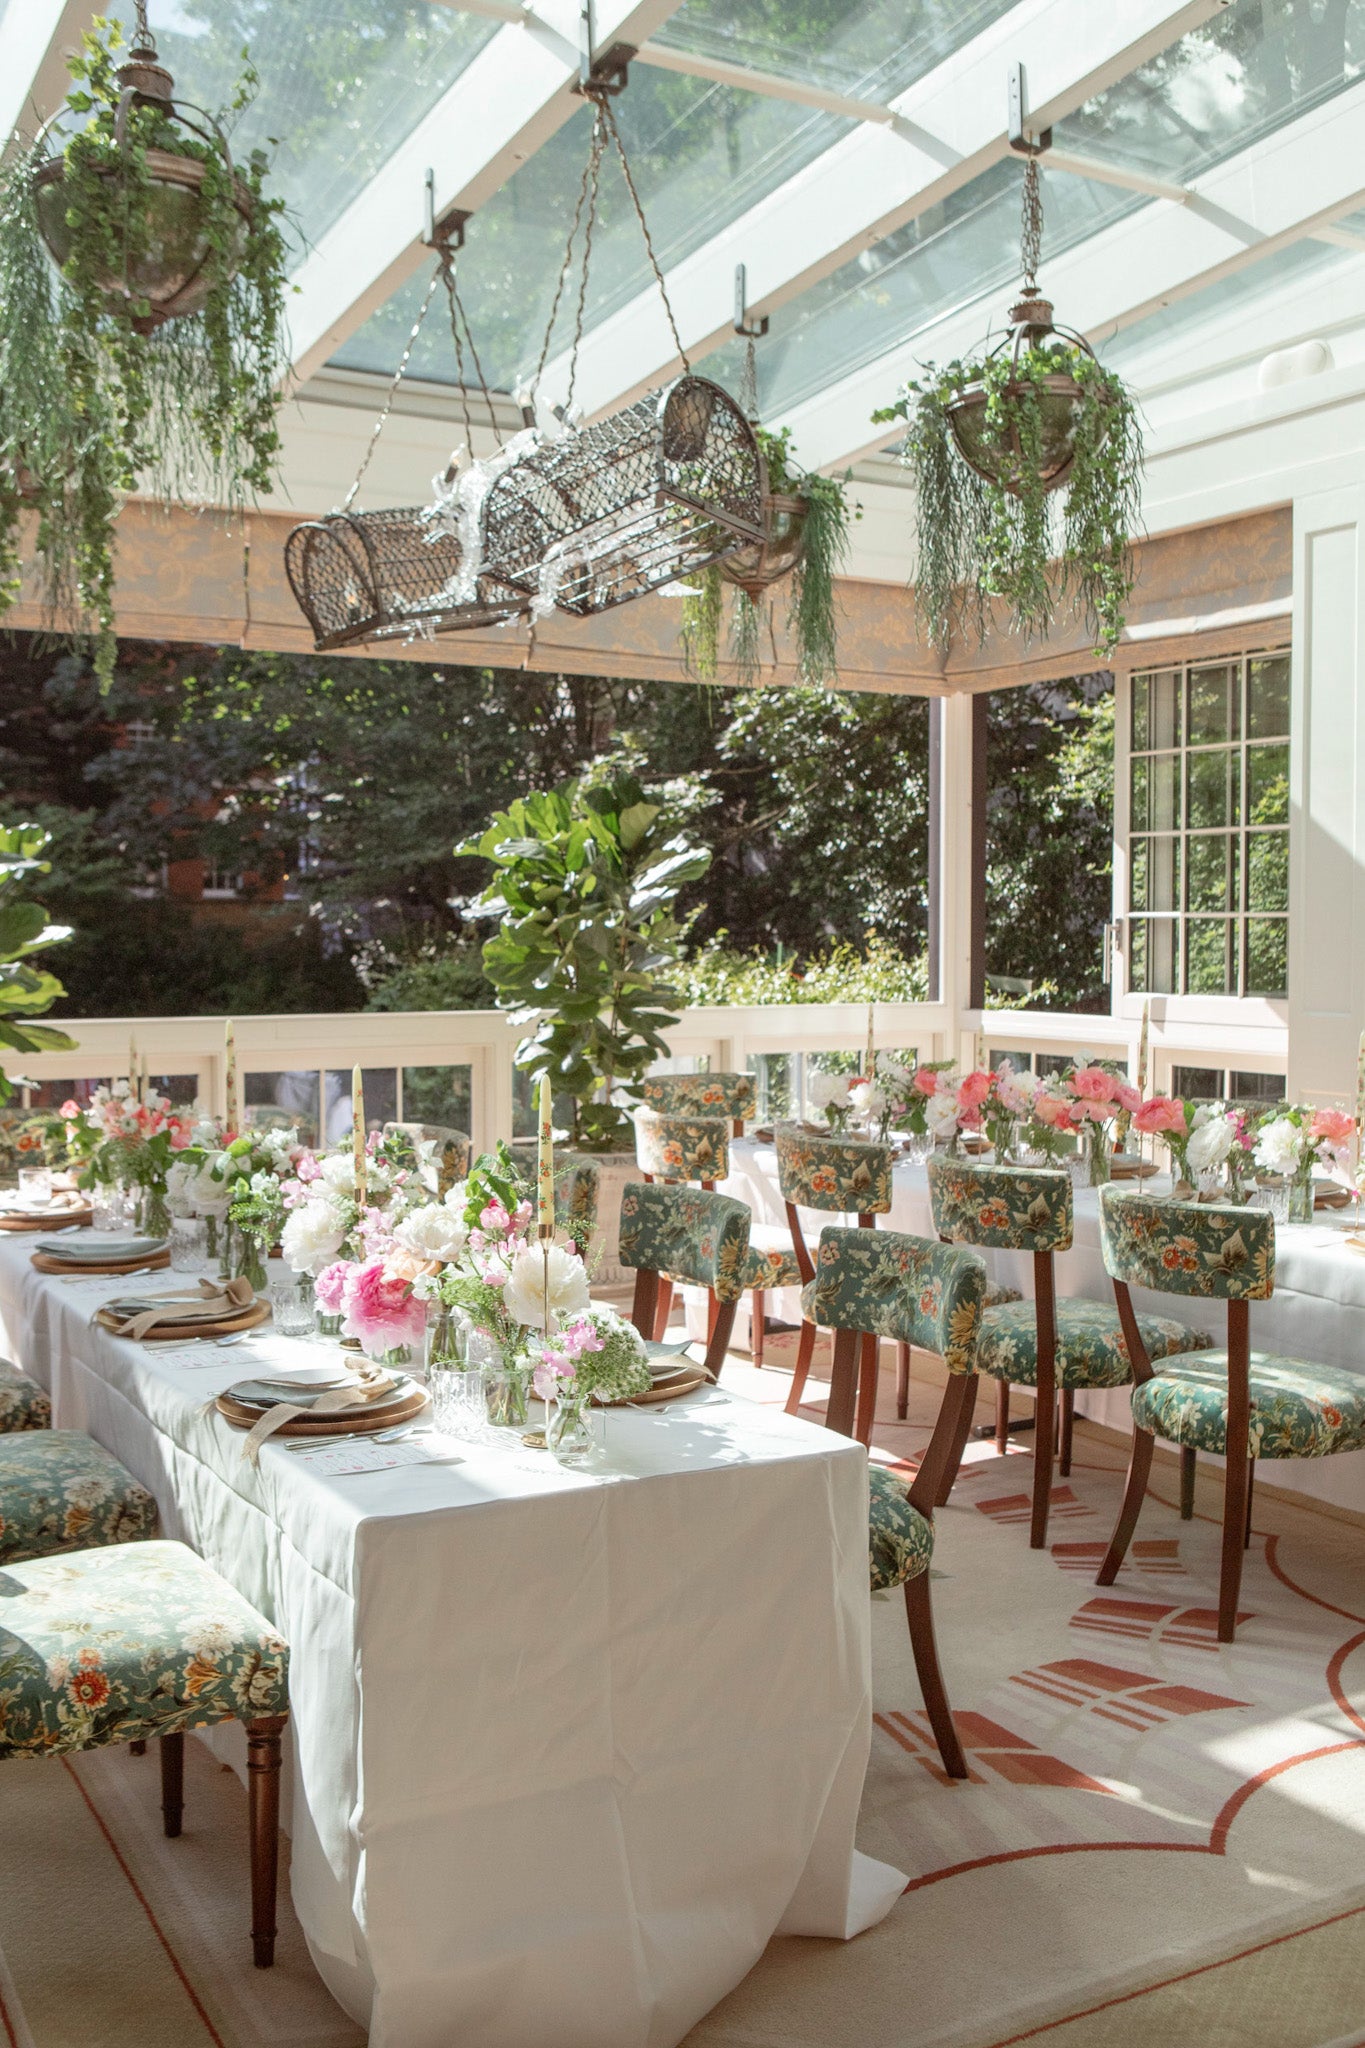 Tables set for brunch with June flowers by Rosanna Falconer at The Goring